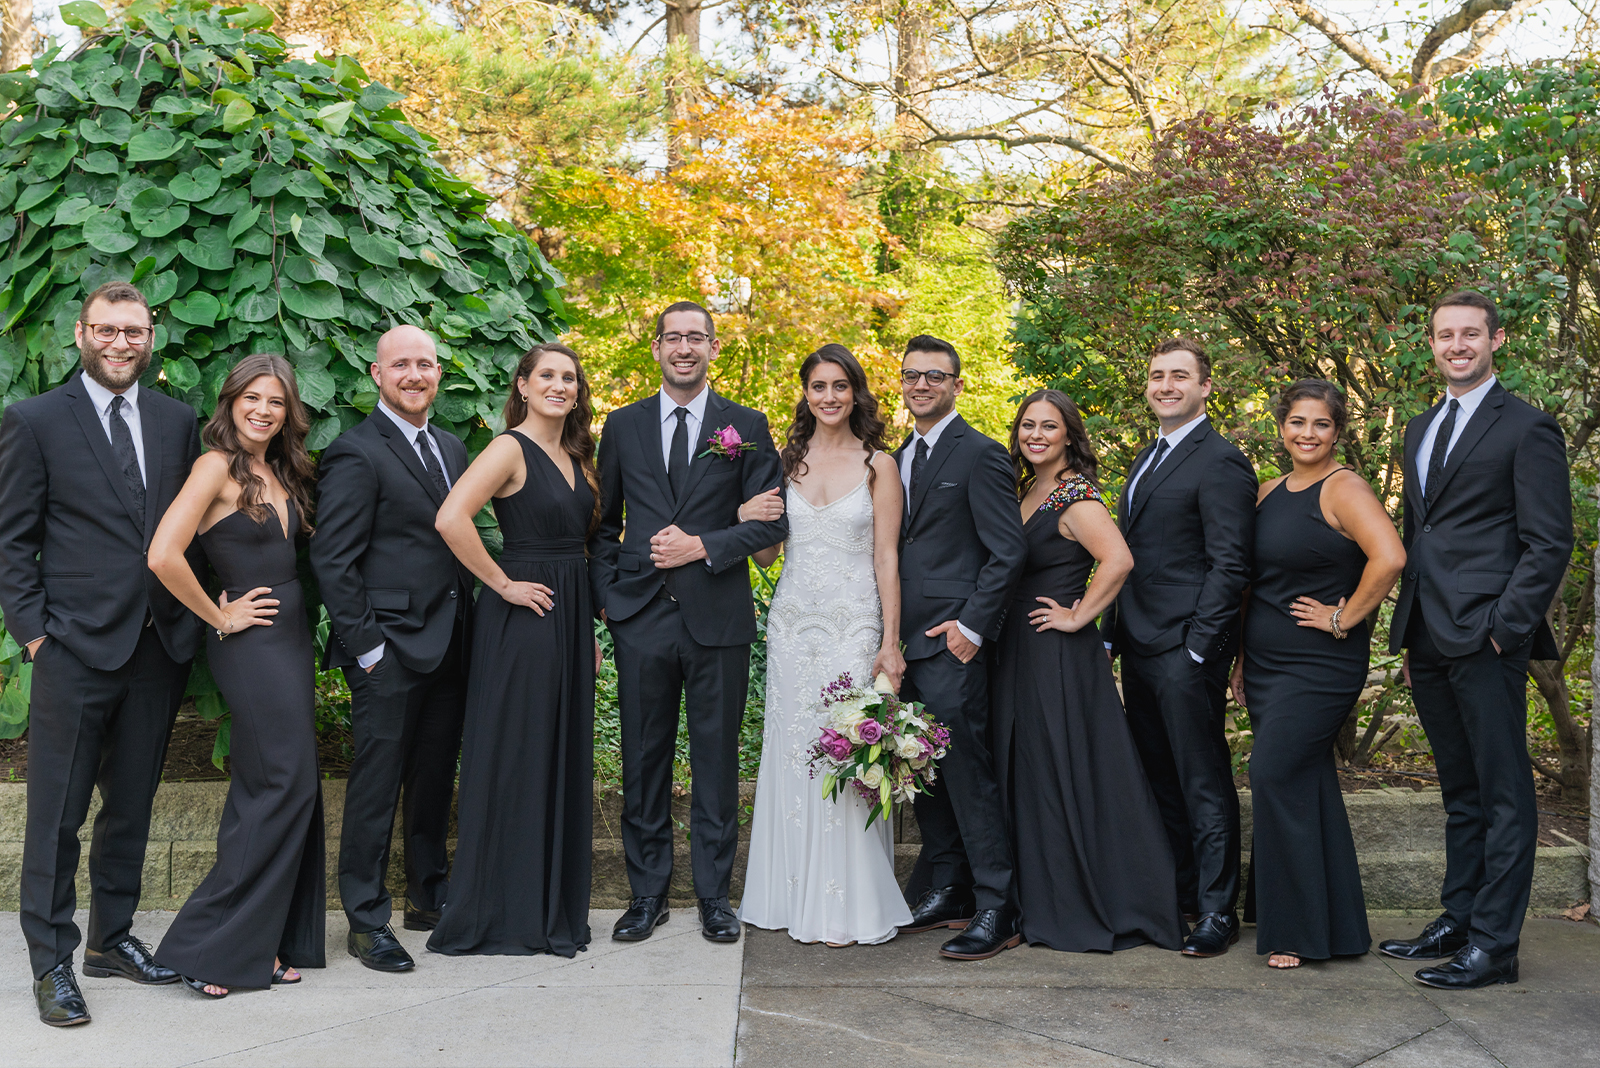 Bride and groom with bridal party, bridal party portrait, classy pose, green, trees, nature, bushes, classy wedding ceremony at Landerhaven, Mayfield Heights OH